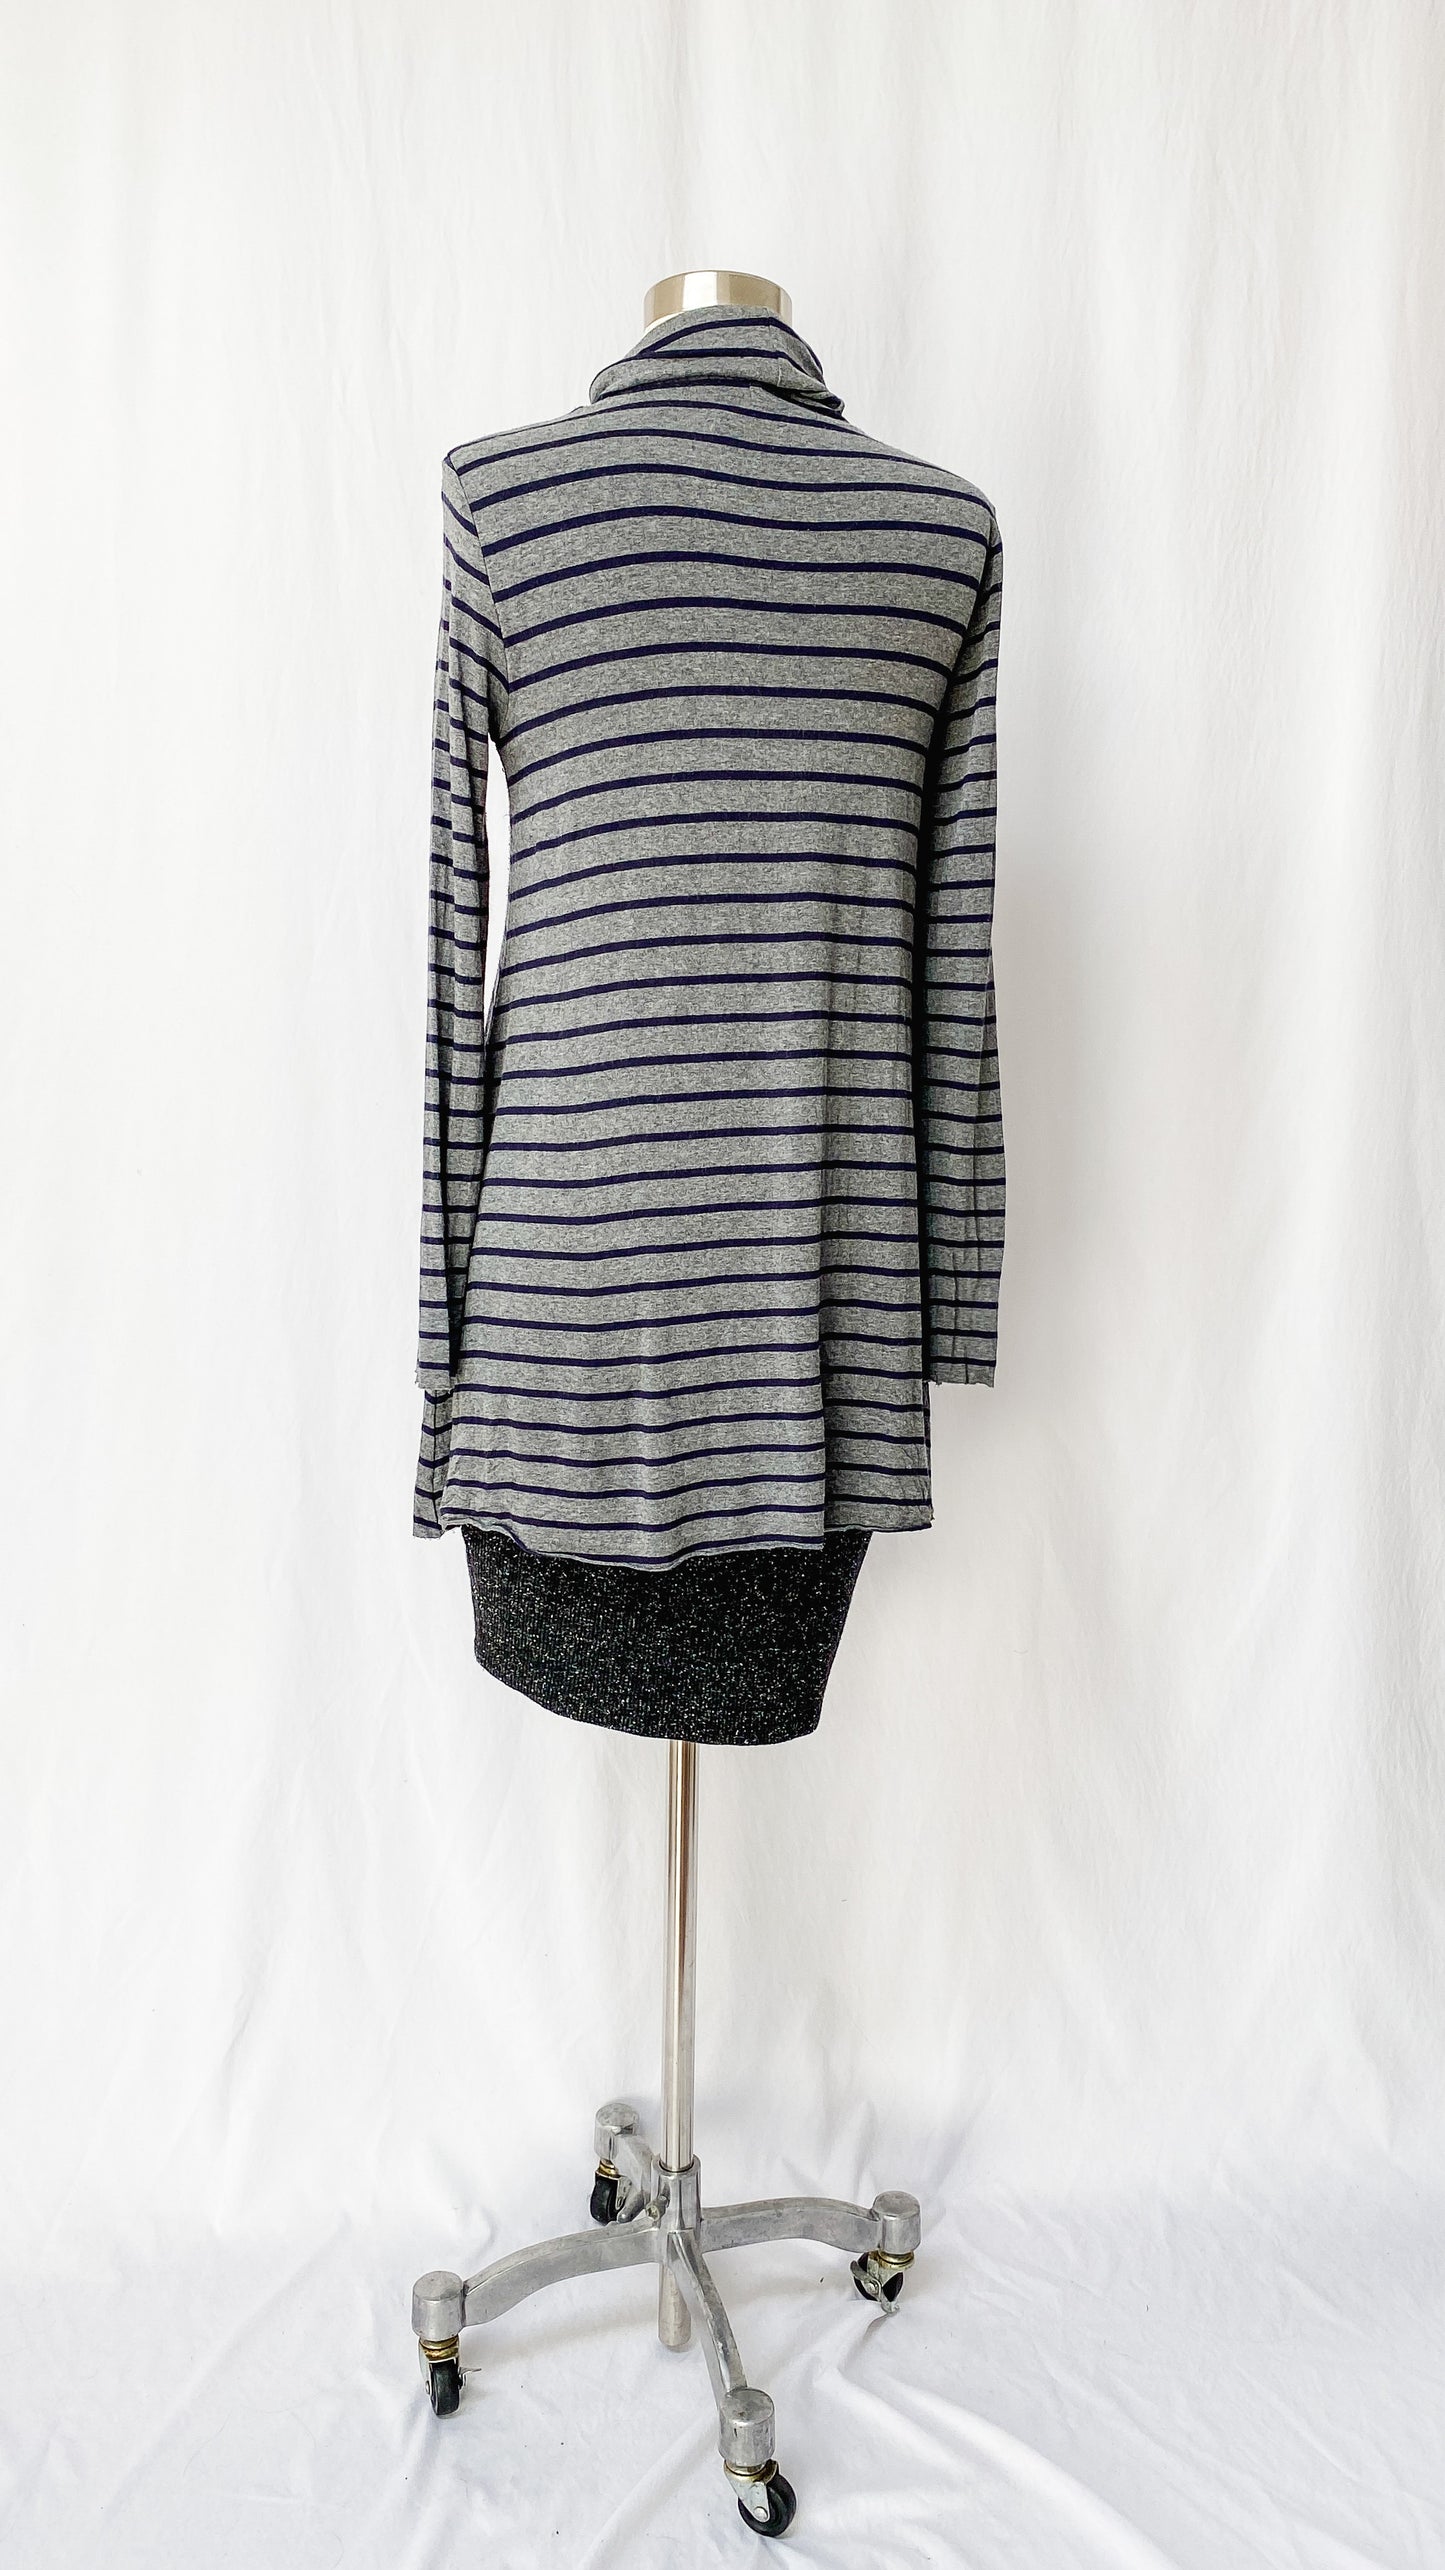 Anthropologie Bailey 44 Striped Layered Dress (S)